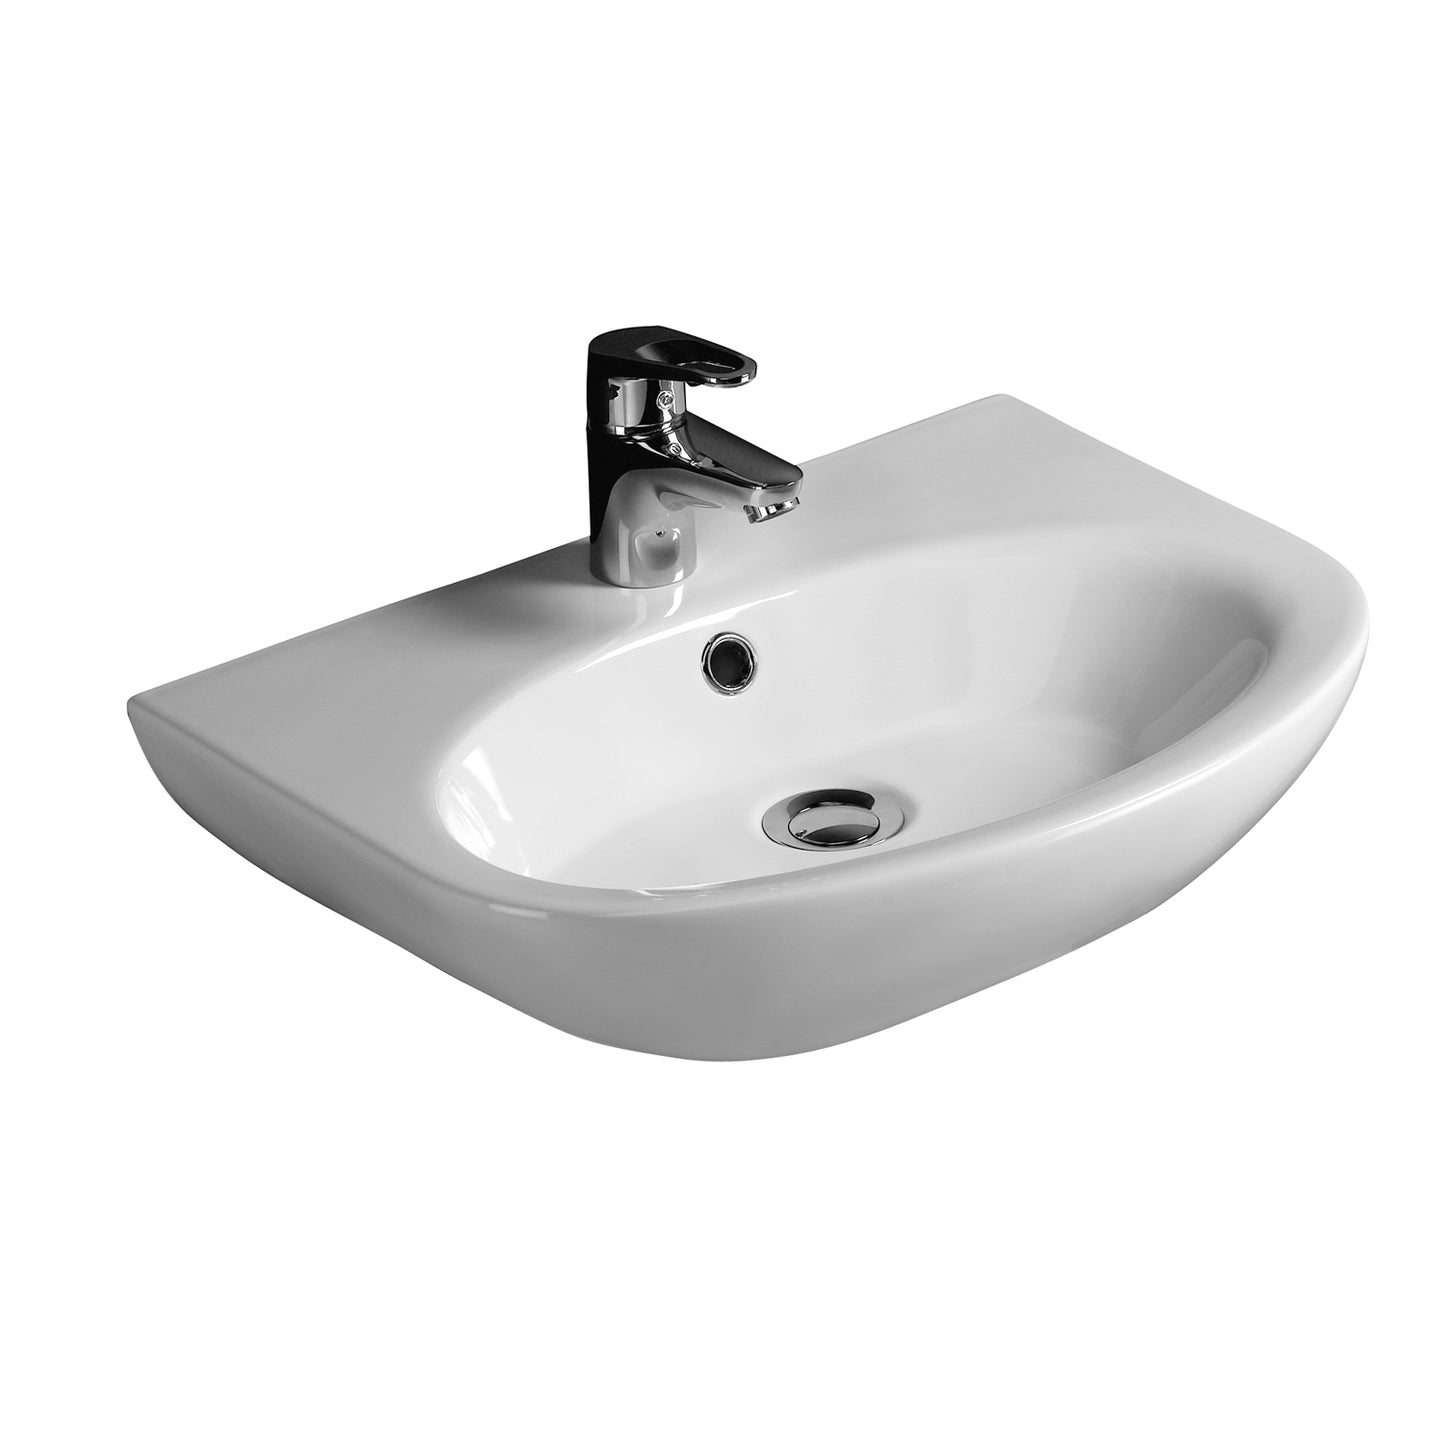 Infinity 500 Wall Hung Sink for 8" Widespread and Overflow White